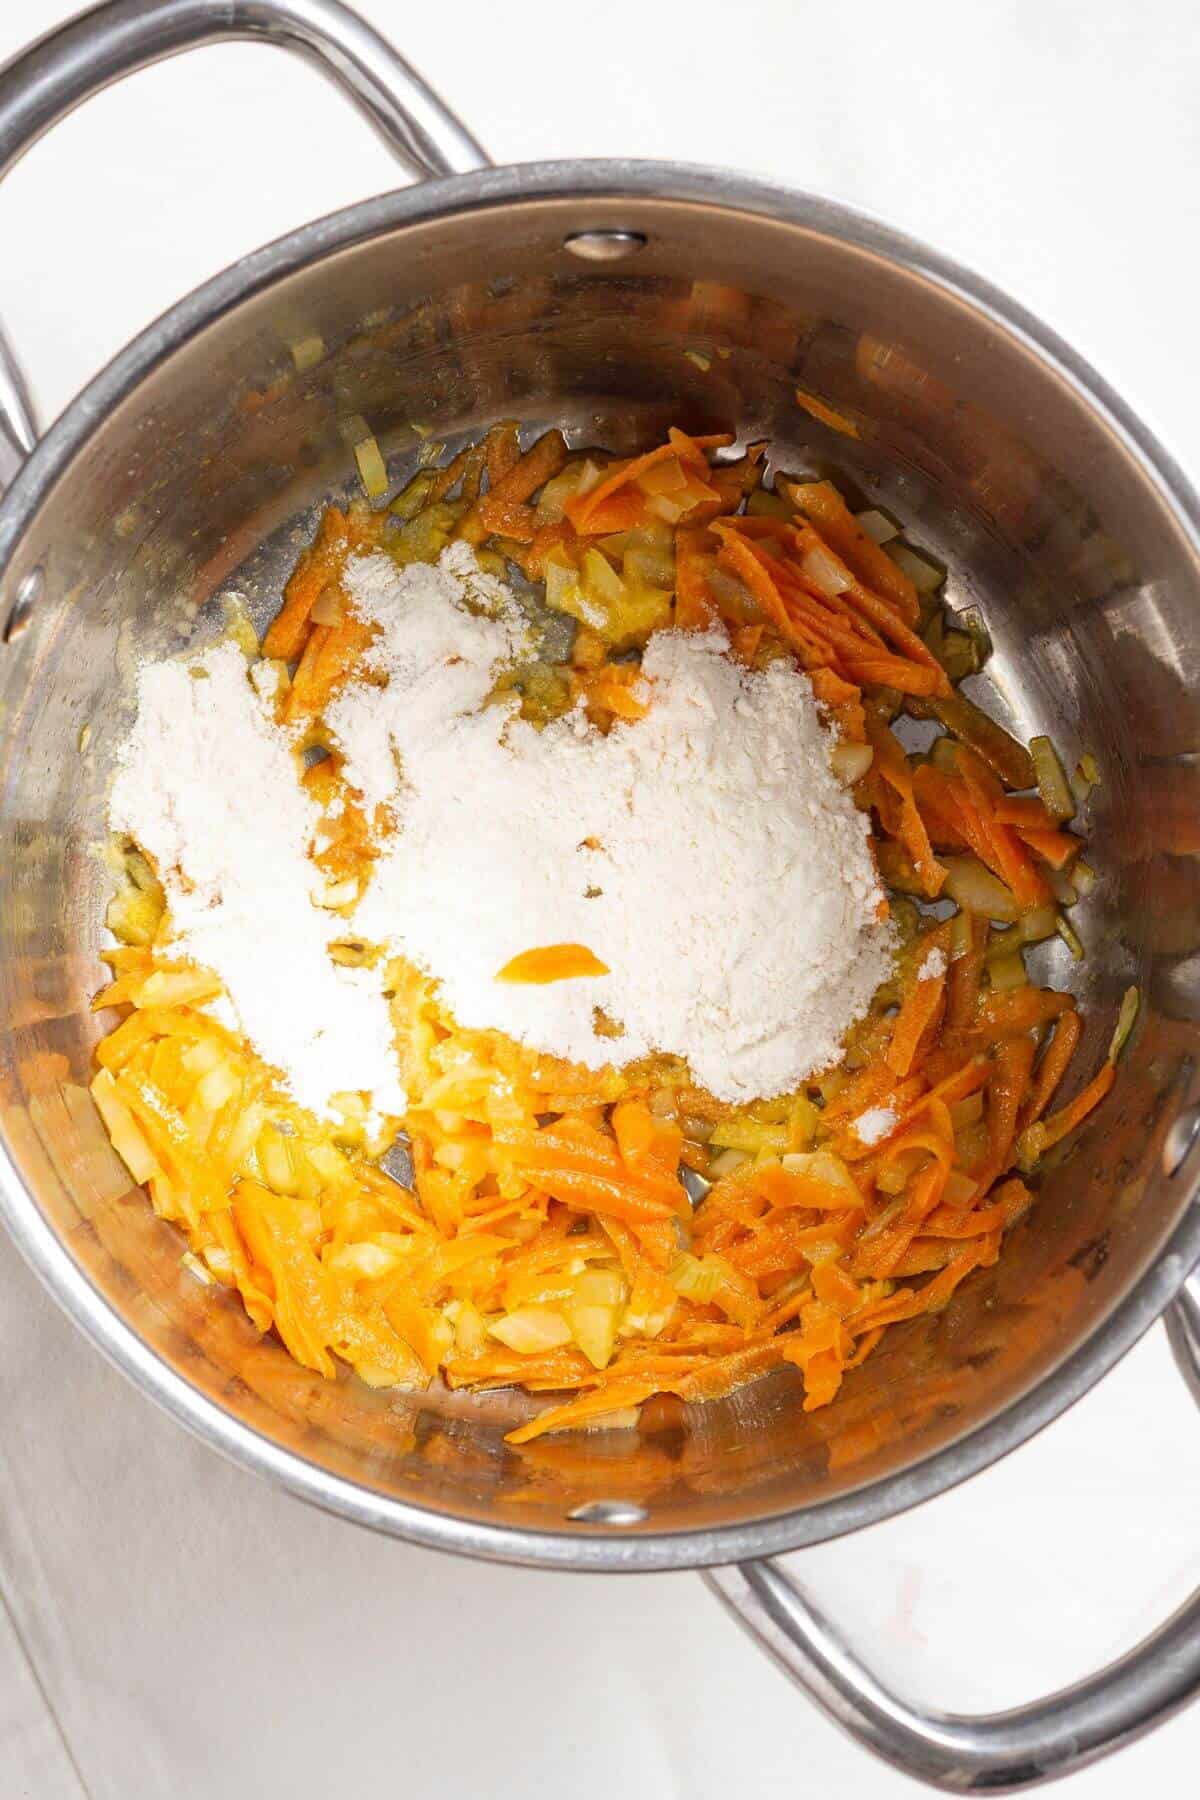 Flour added to vegetables in pot.